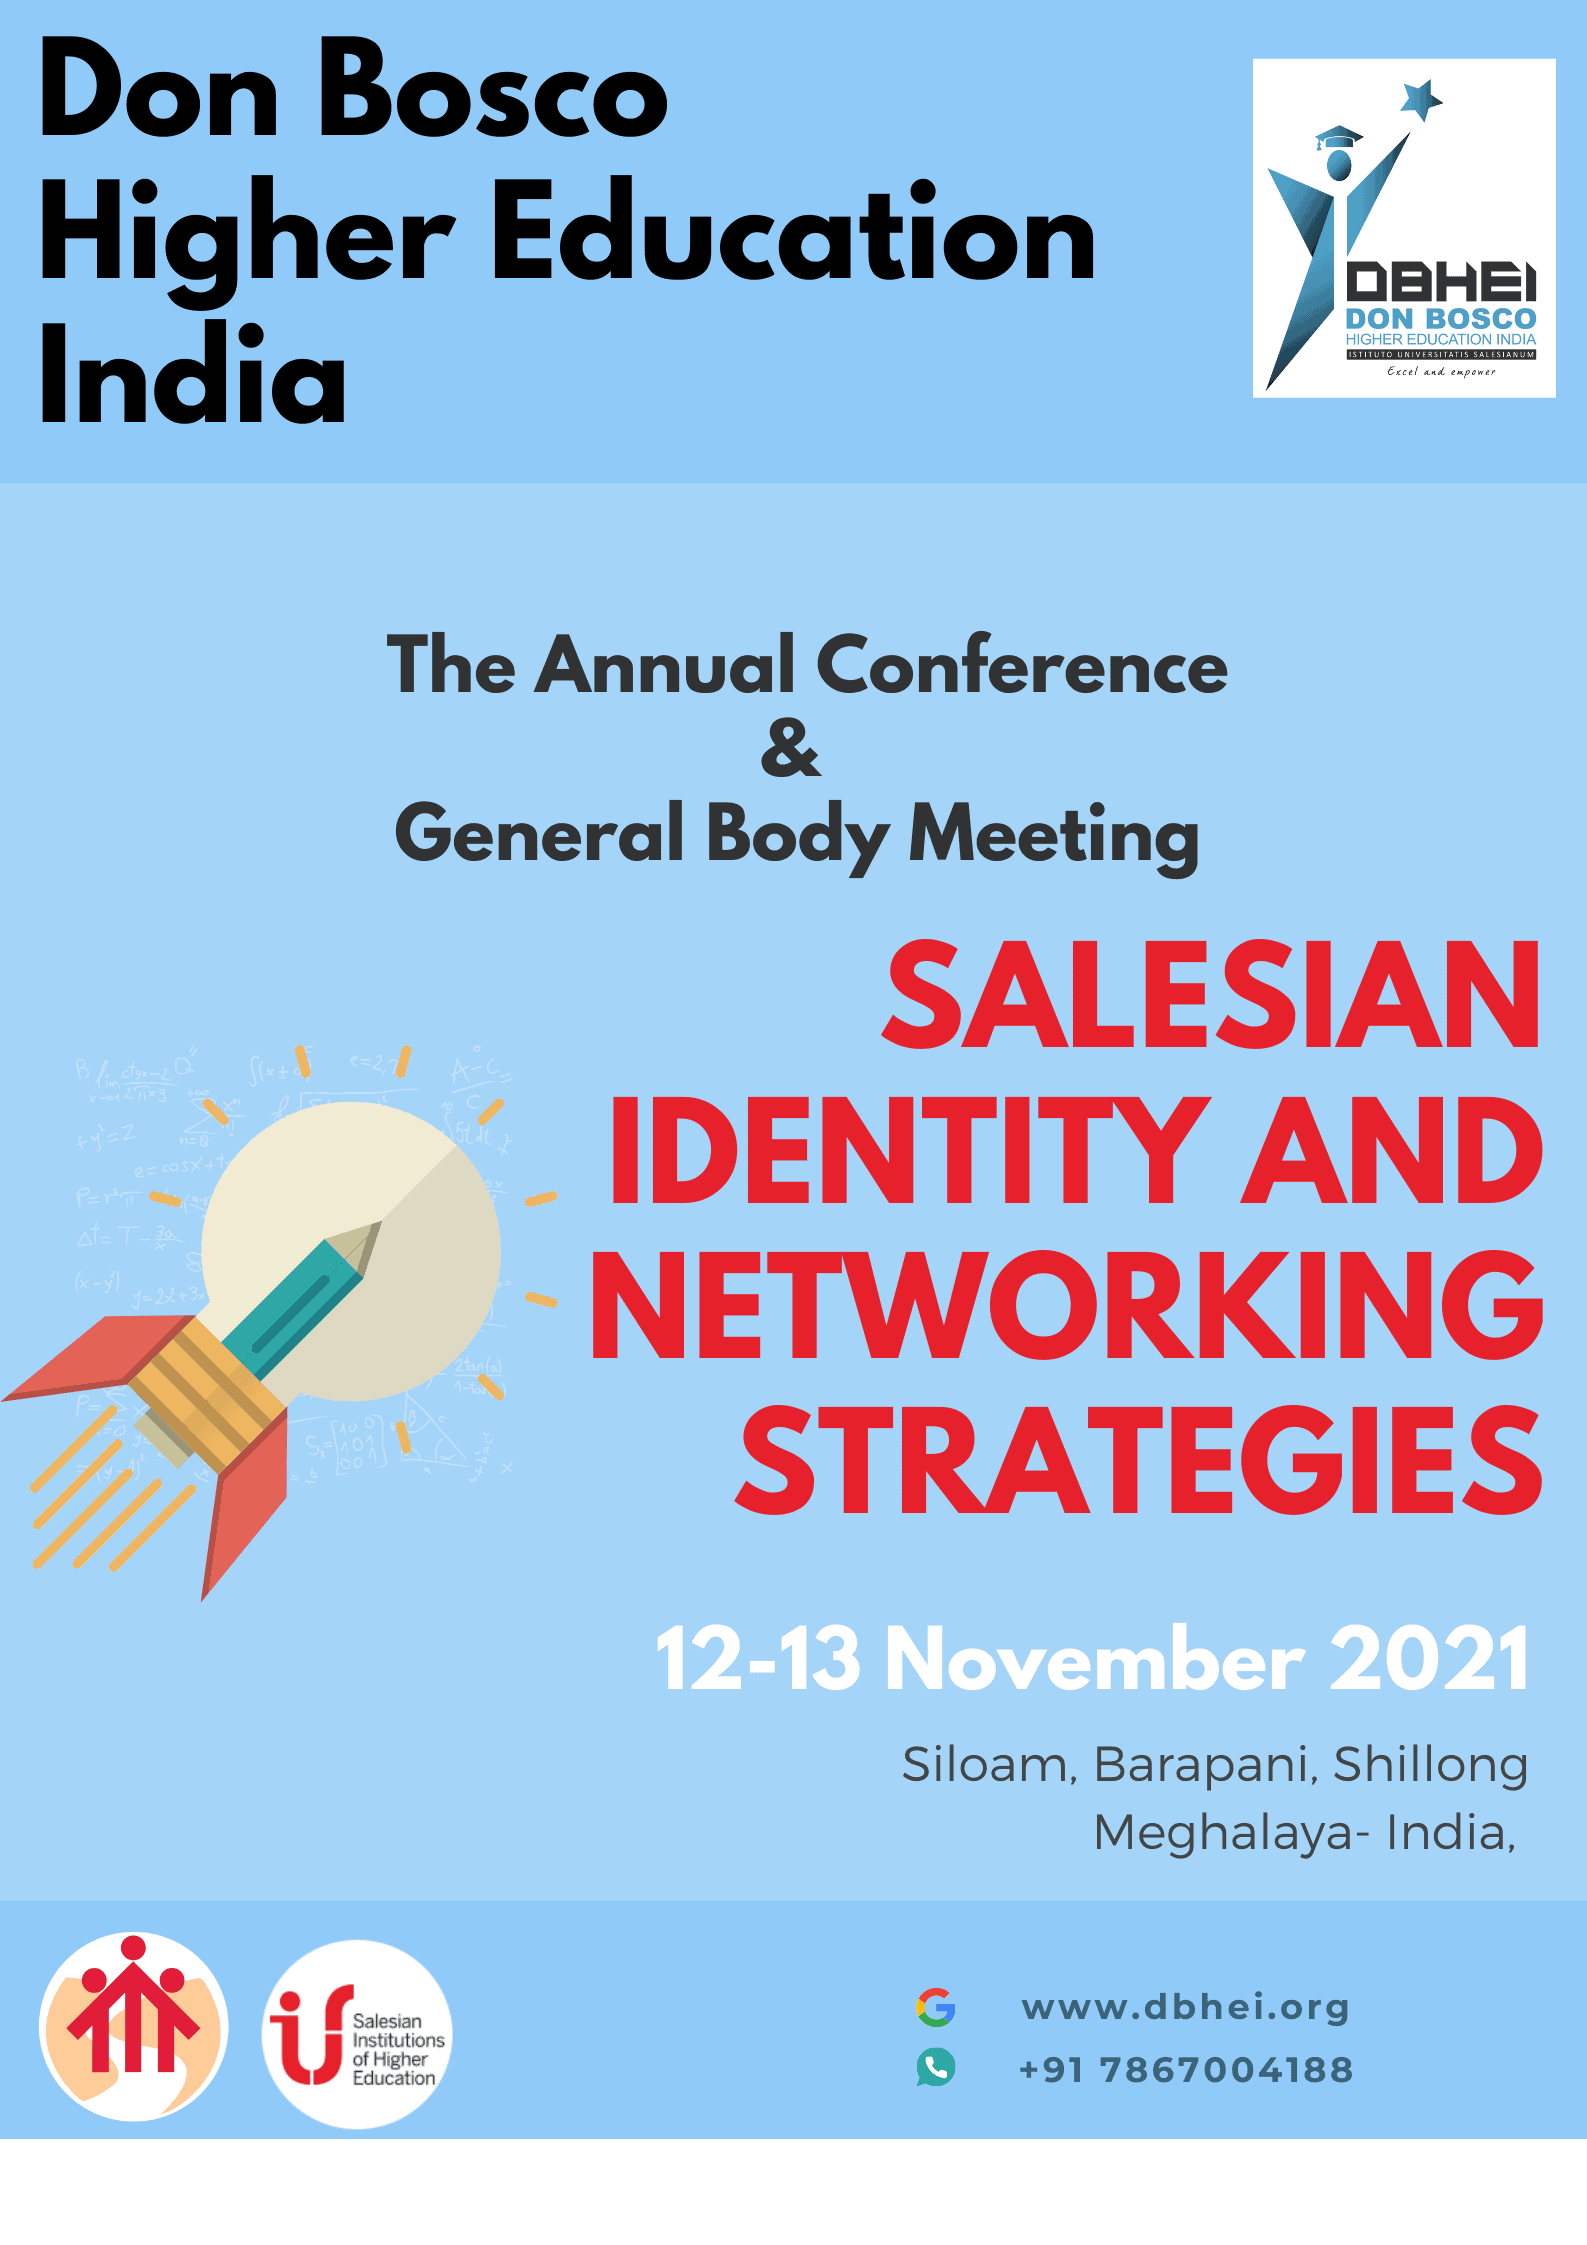 The annual Conference & General Body Meeting, Salesian Identity and Networking Strategies, Don Bosco Higher Education